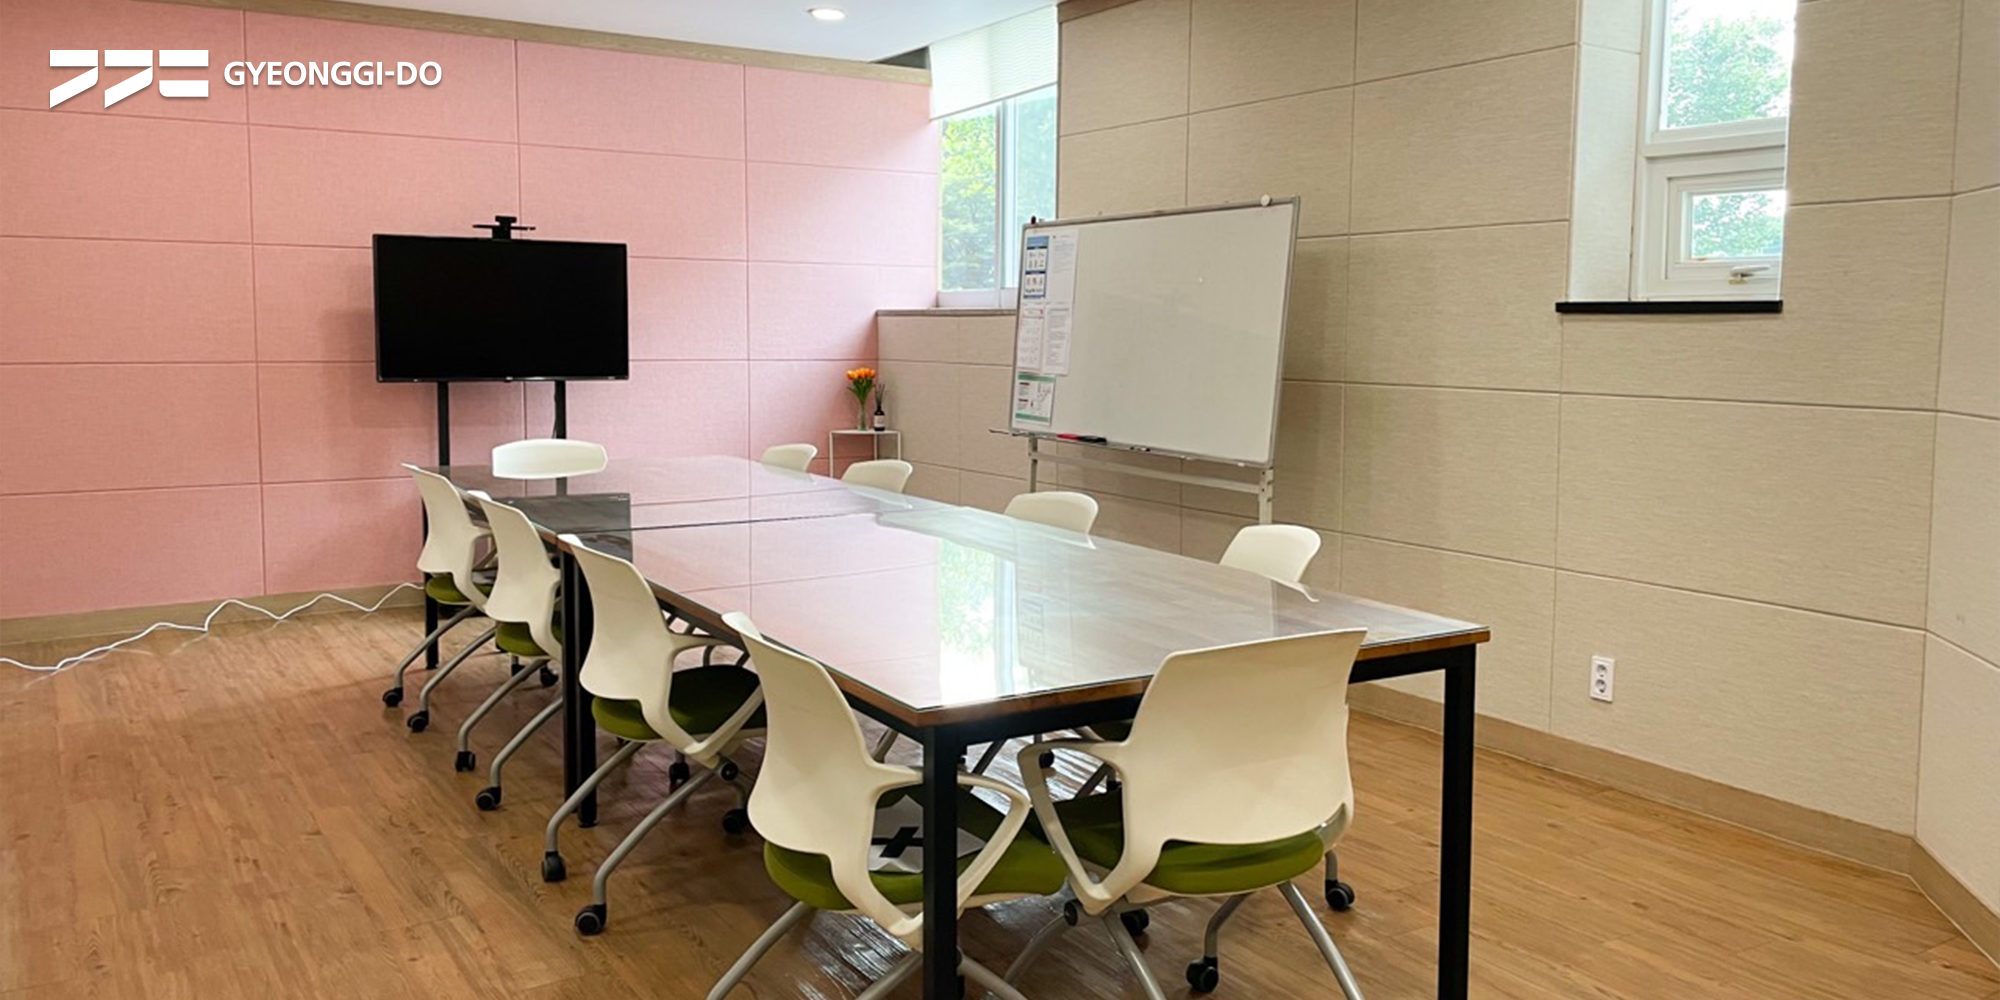 Pursue various activities for free in the "Communication Sharing Spaces" of the Women's Vision Center in Suwon City, Gyeonggi Province!